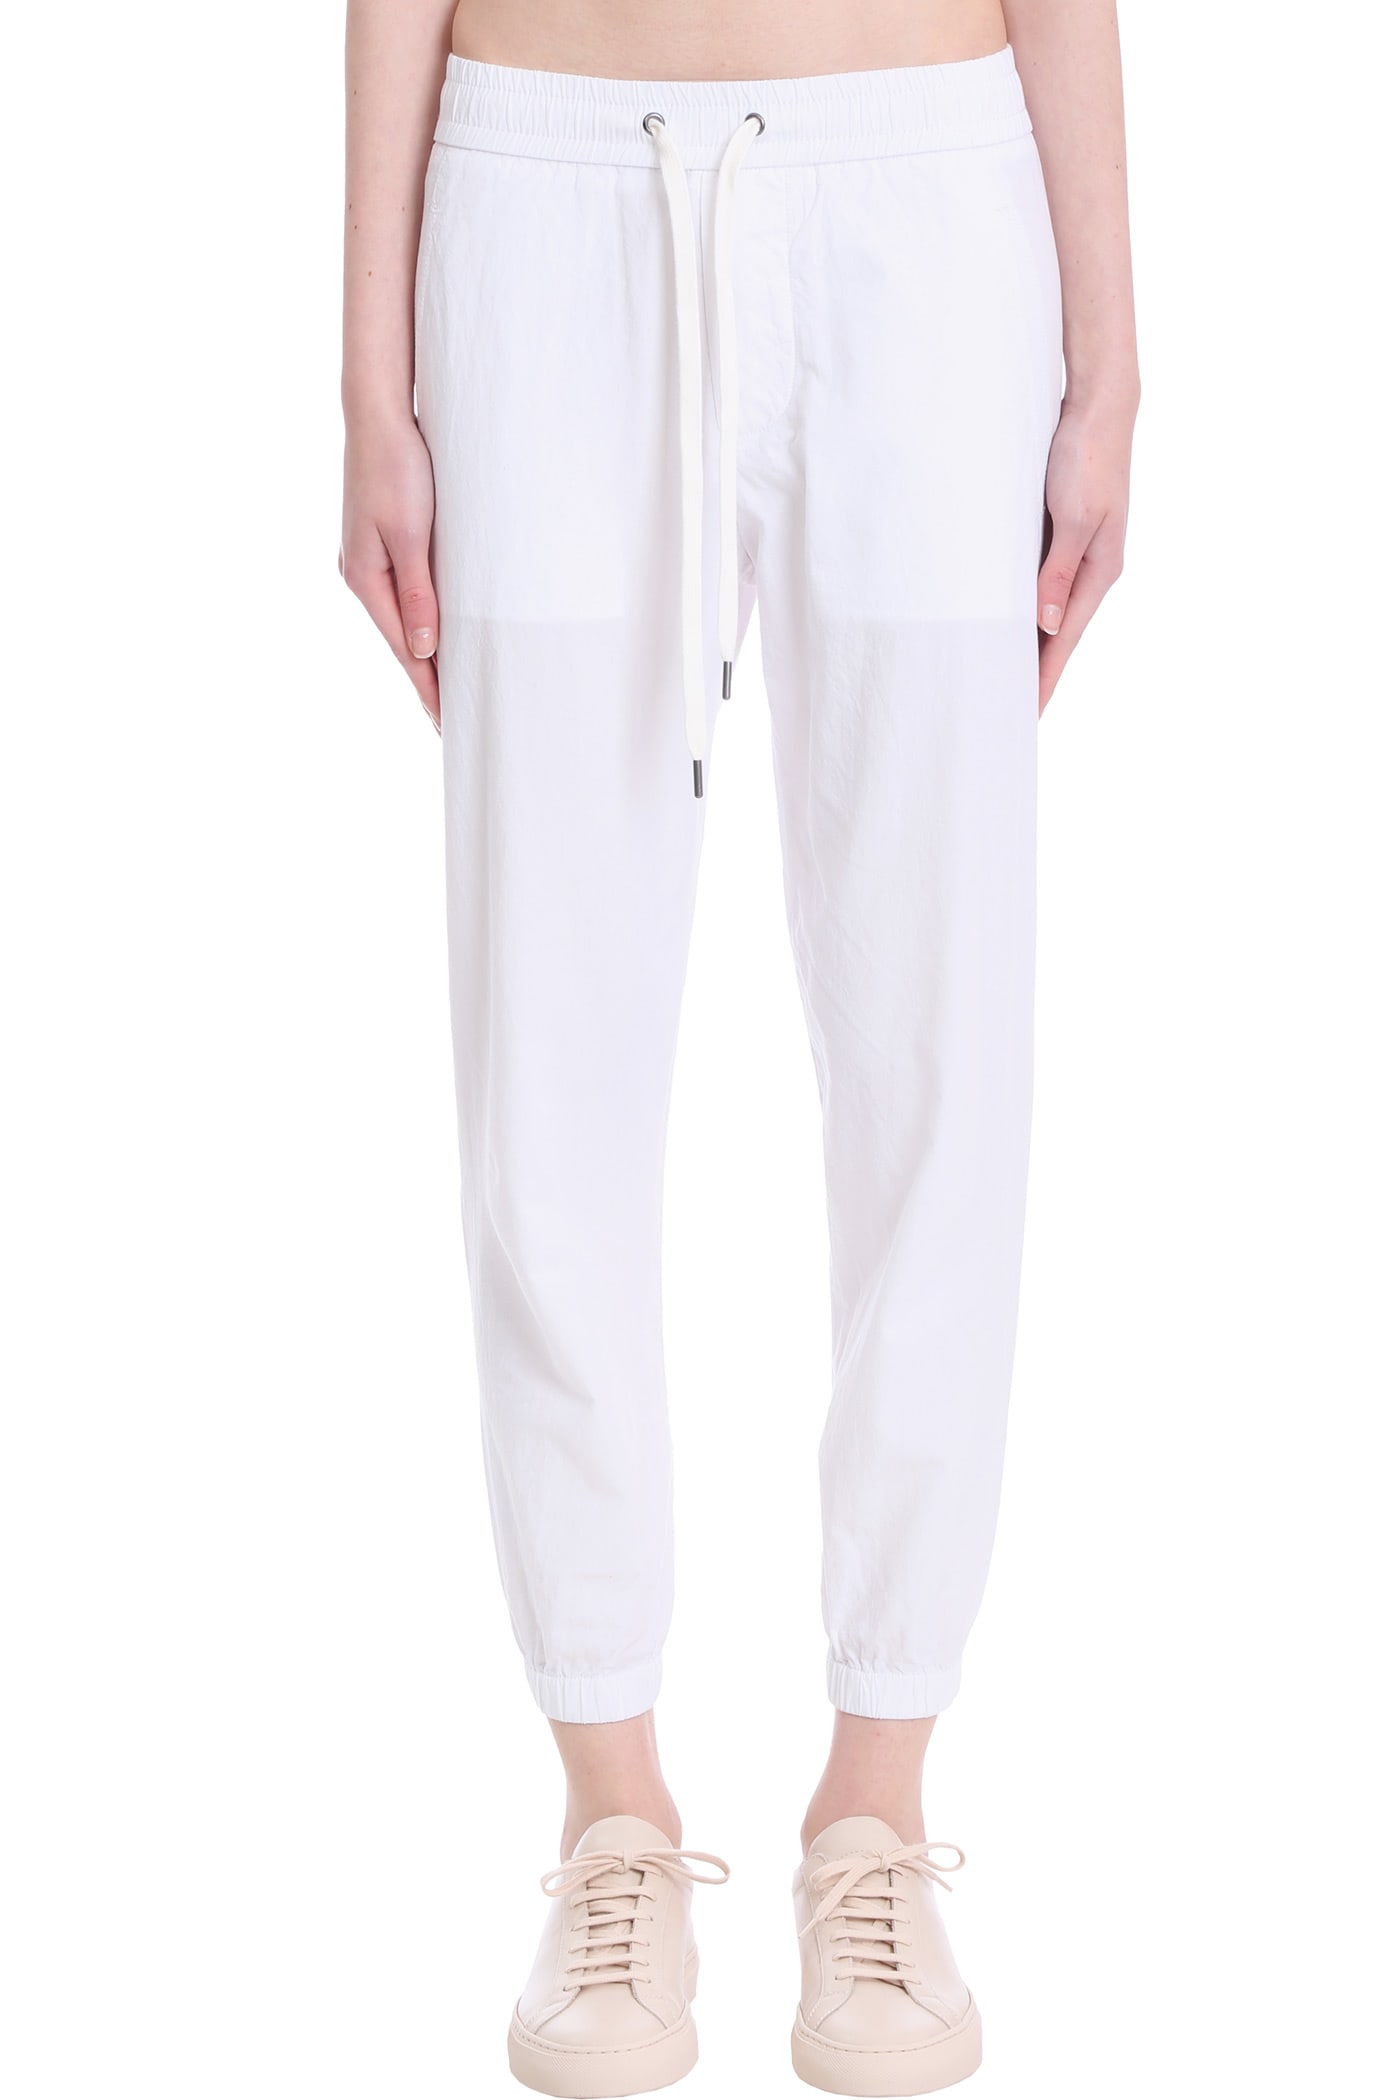 JAMES PERSE trousers IN WHITE COTTON,WCFP1894